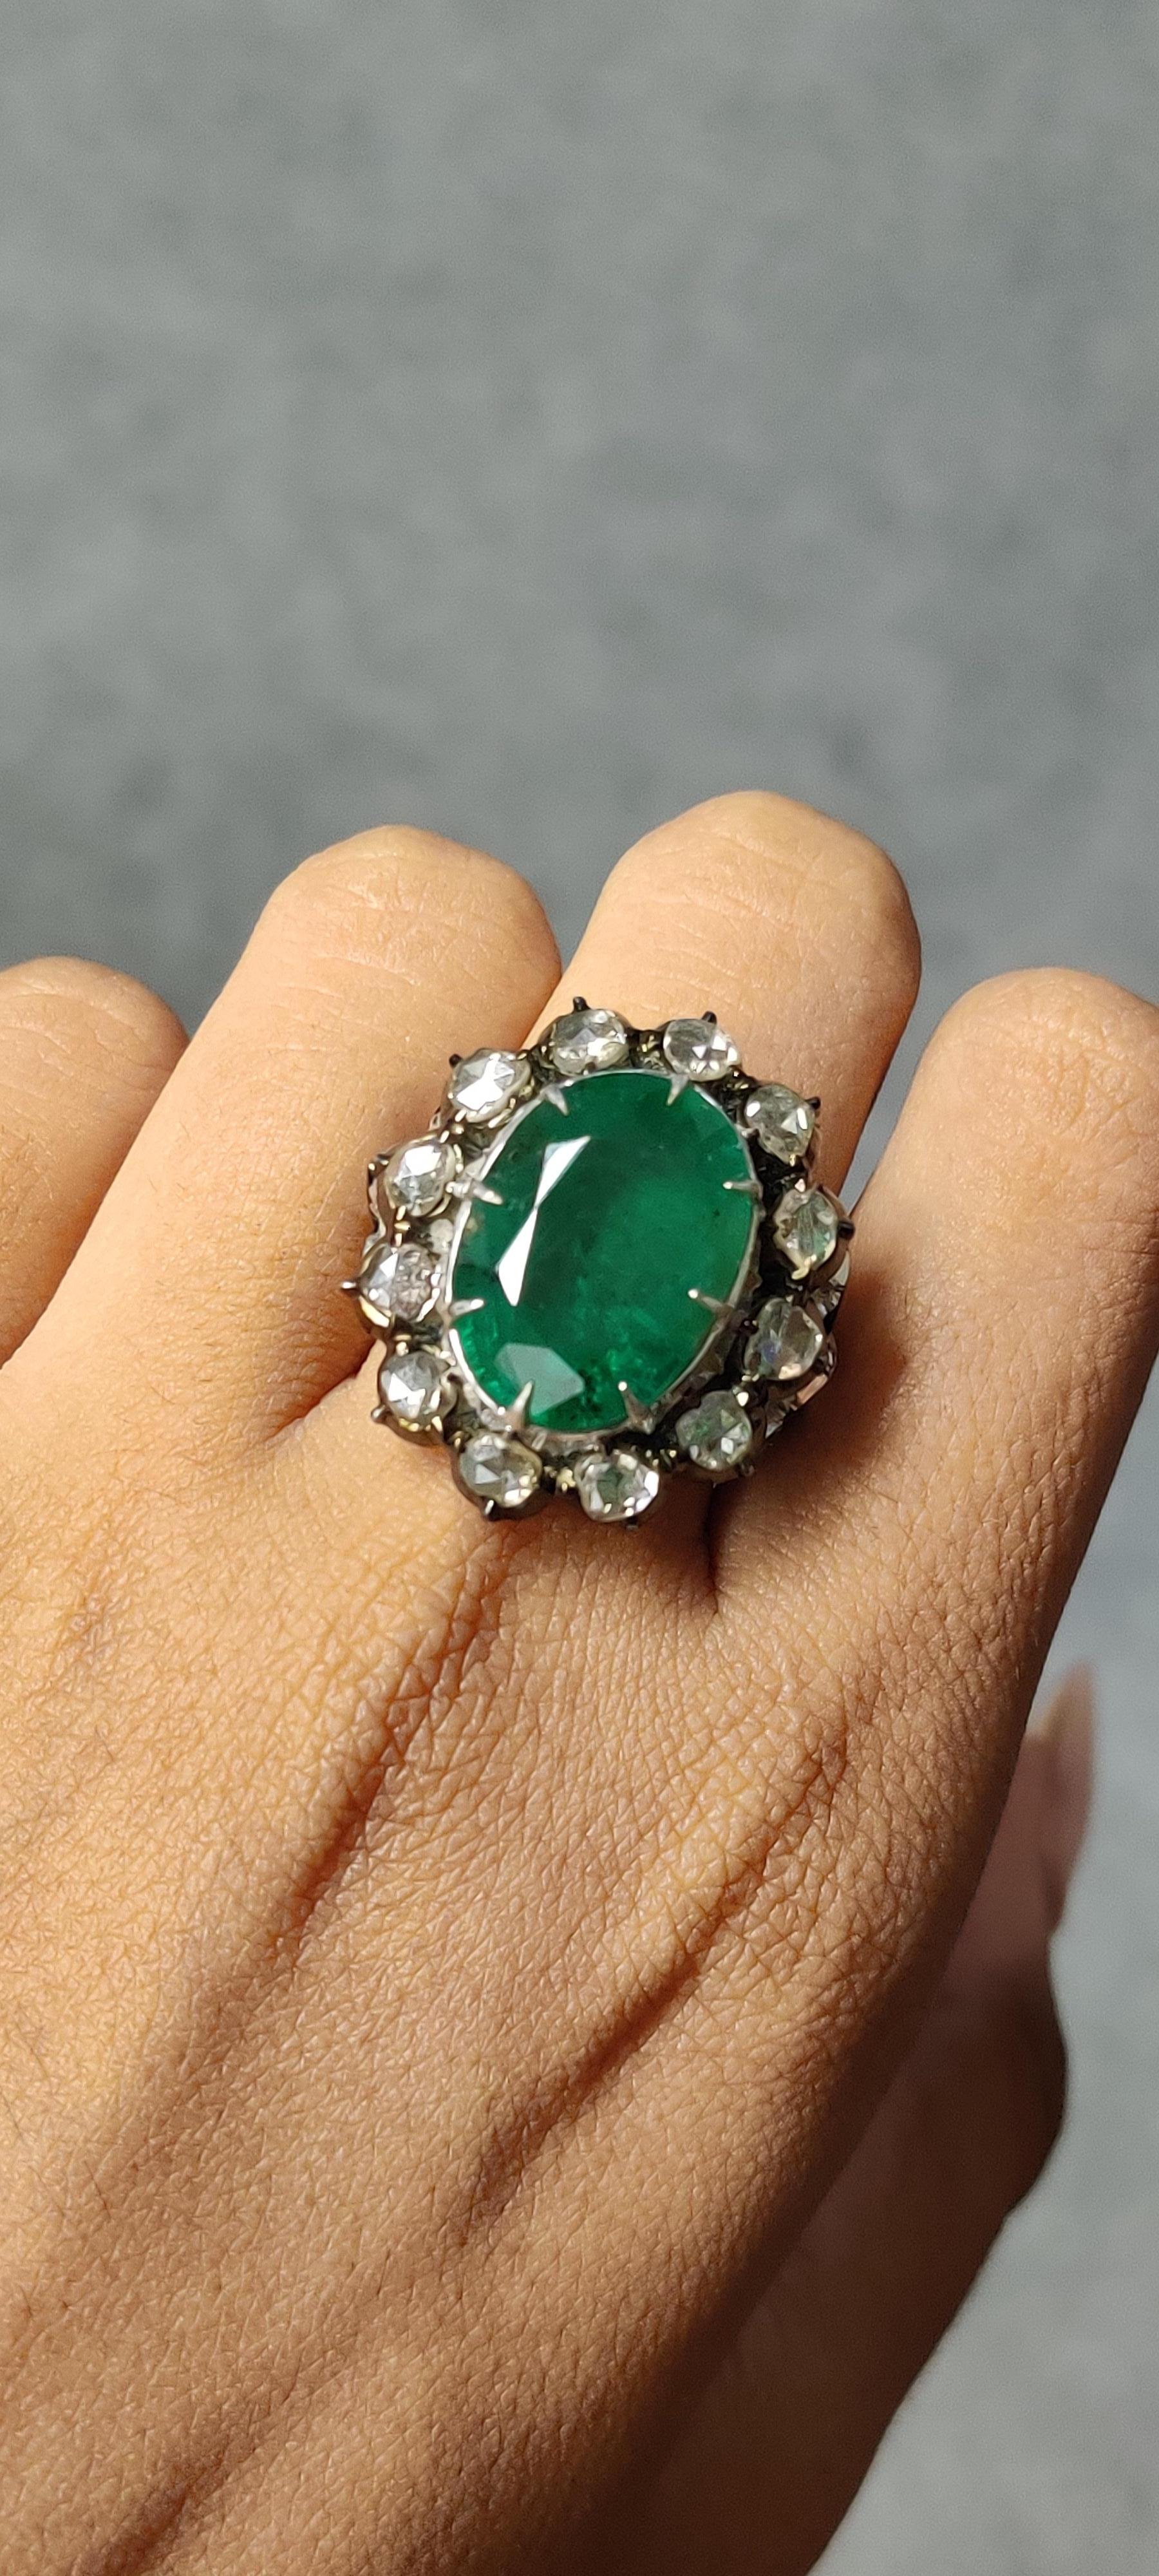  8.9 Ct Zambian Emerald Art Deco Ring with Rose Cut Diamonds in 14K White Gold For Sale 5